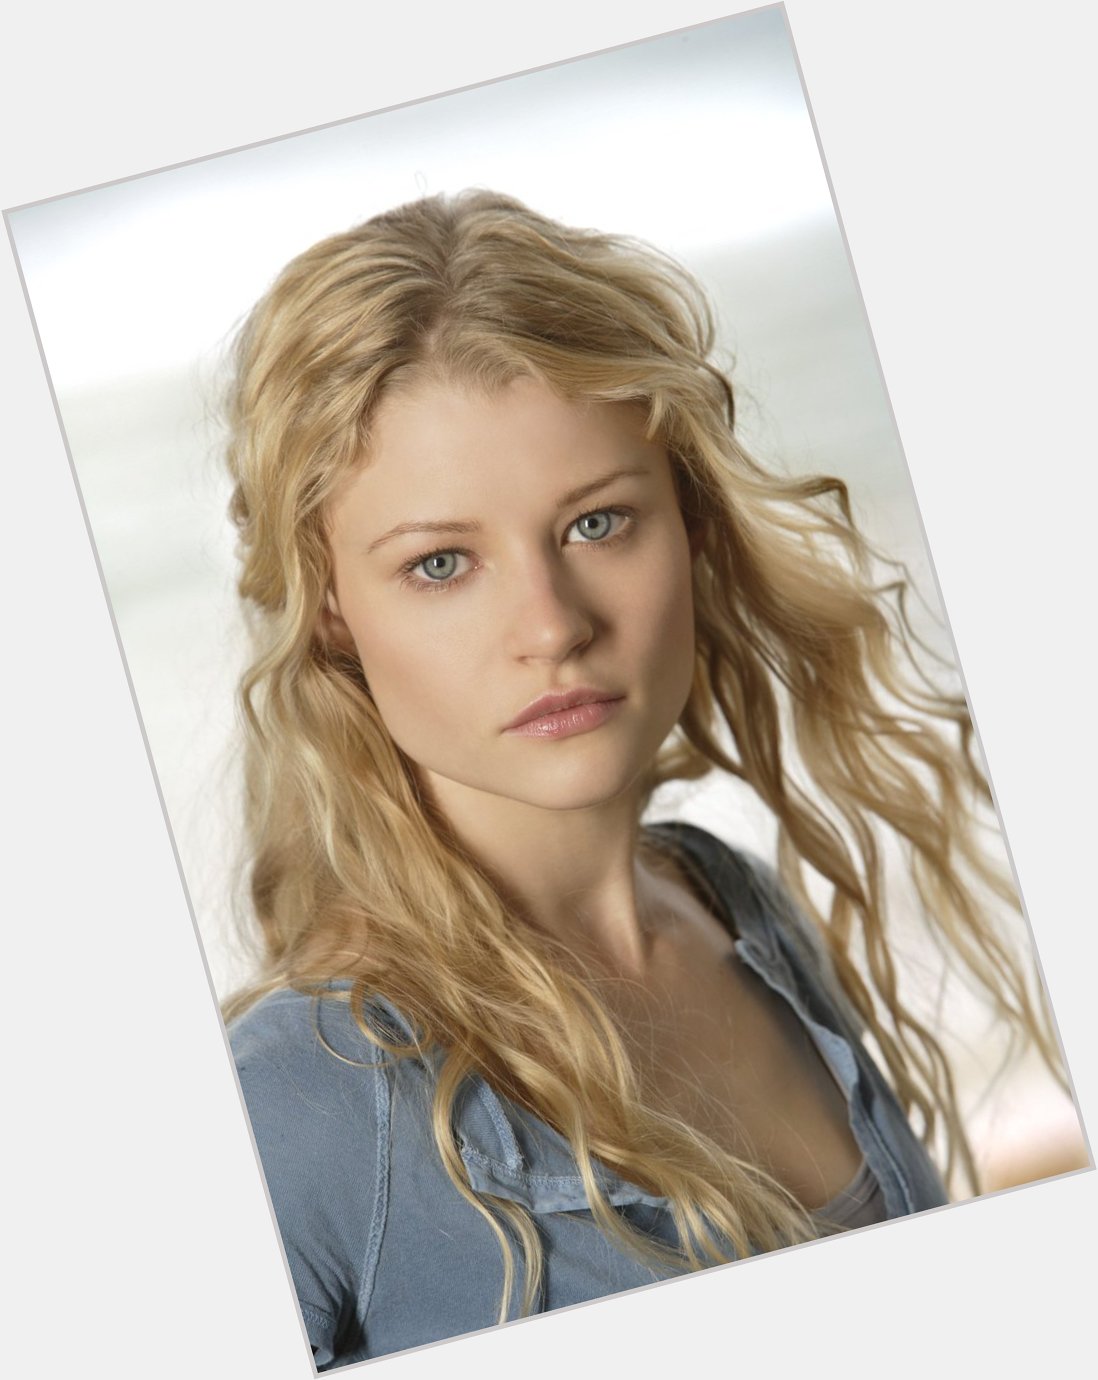 Wishing a very happy birthday today to Emilie de Ravin who played Claire on LOST! 